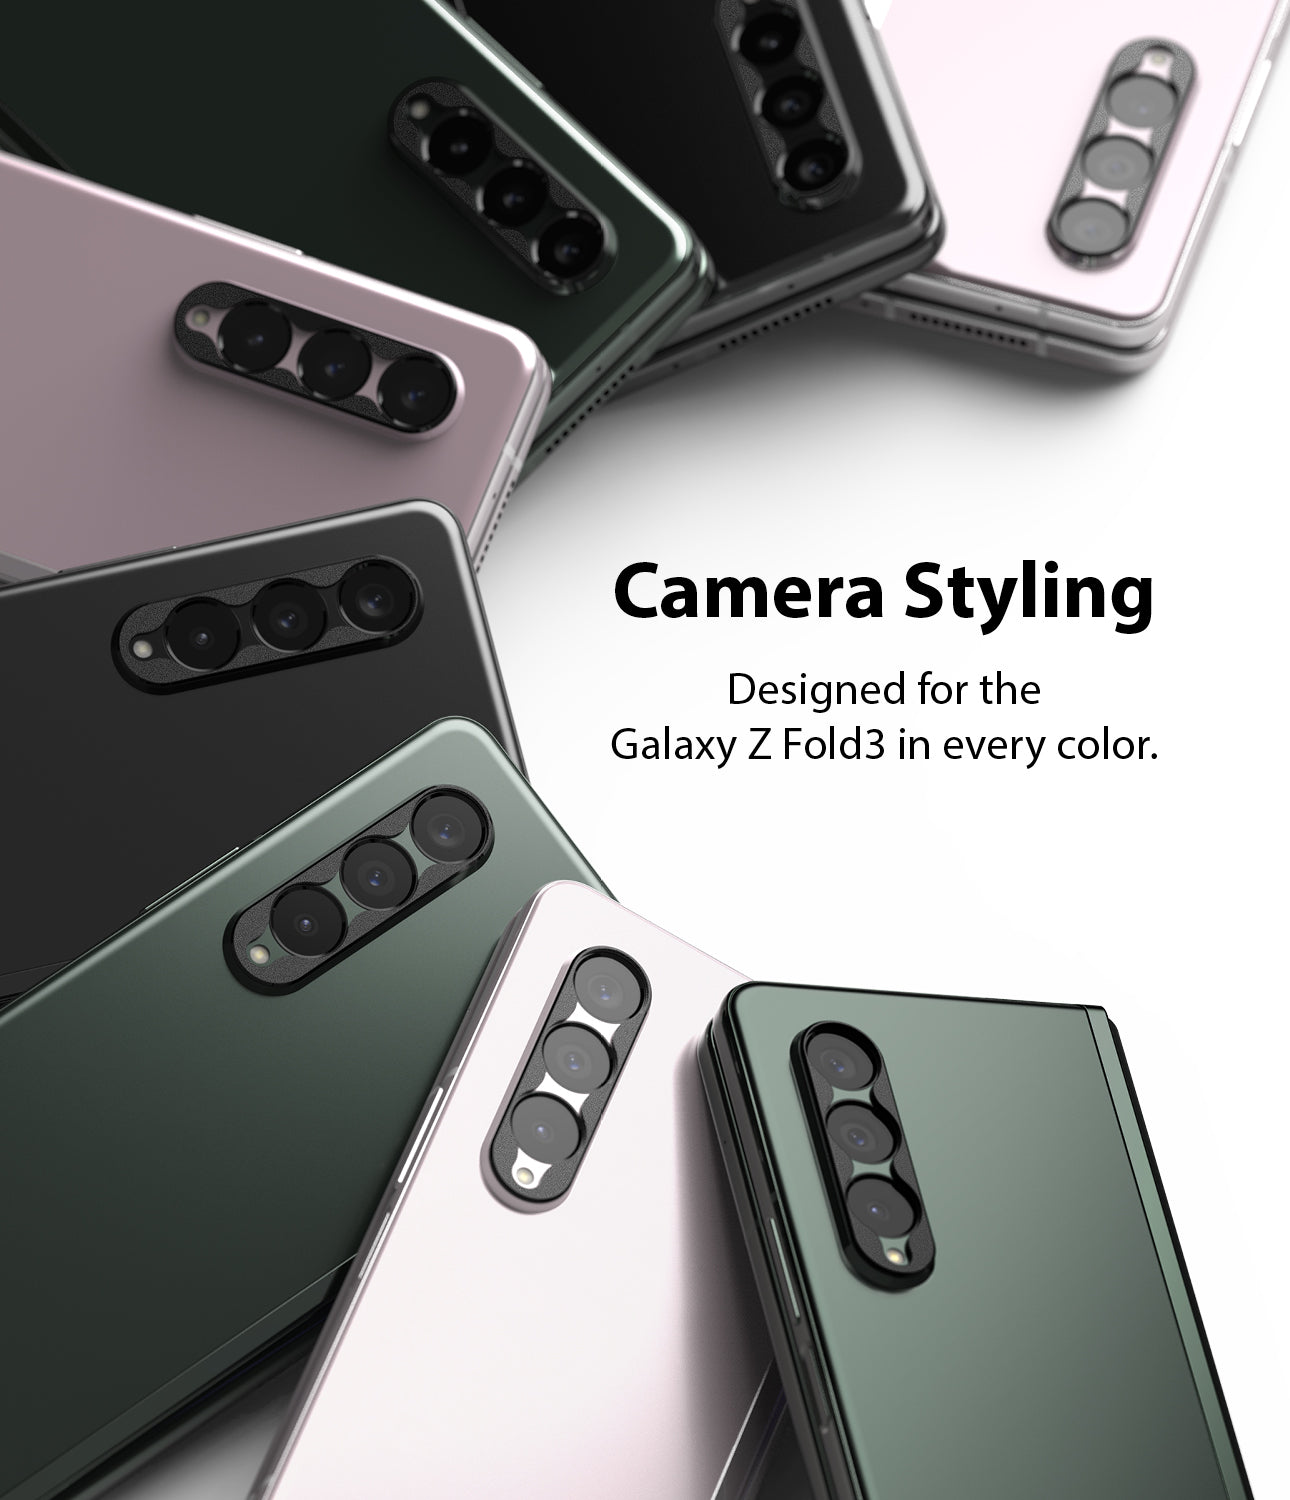 Designed for the Galaxy Z Fold 3